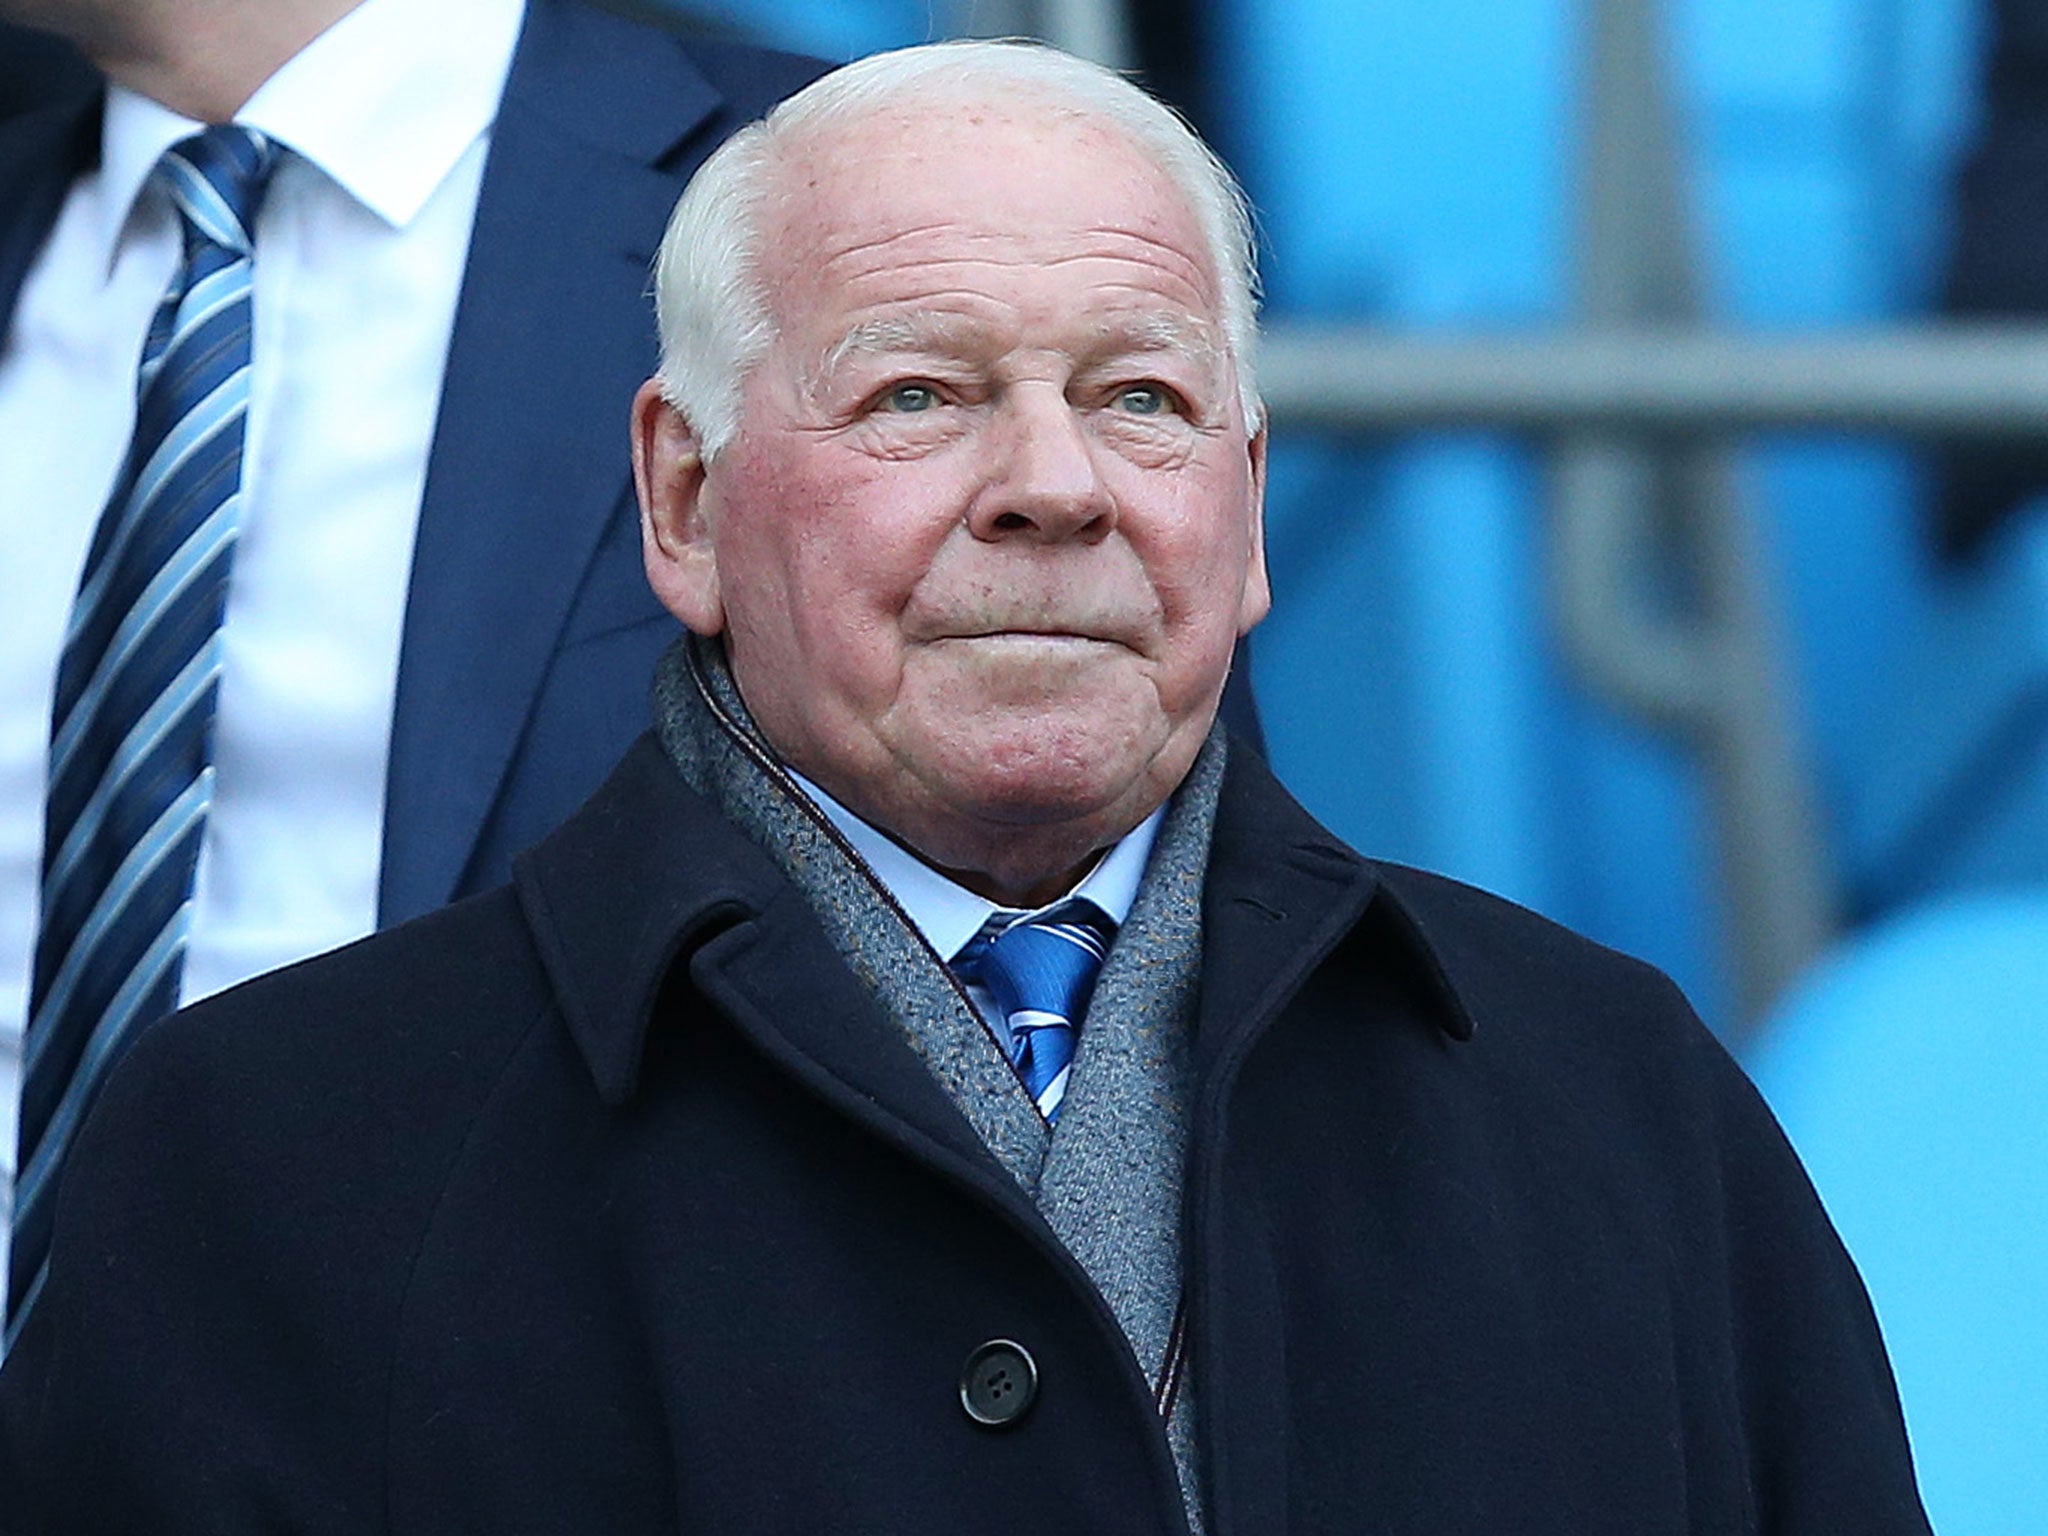 DW Sports, which was founded by former Wigan Athletic owner Dave Whelan, operated 73 gyms and 75 retail sites across the UK